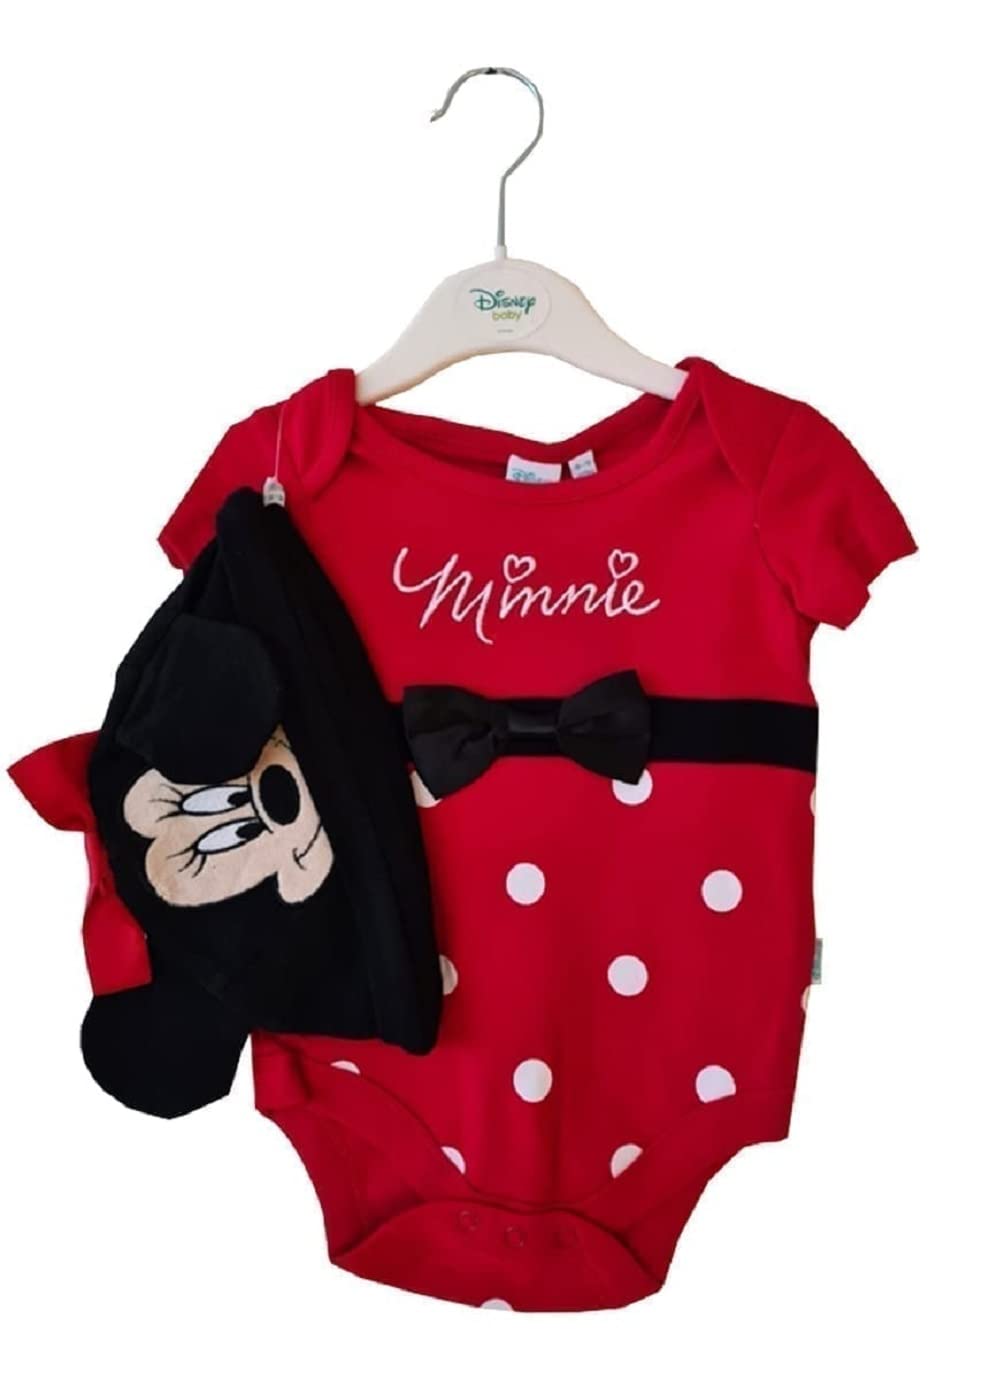 (DC-BYS) Child Girls Minnie Mouse Red Bodysuit Costume (3-6m)